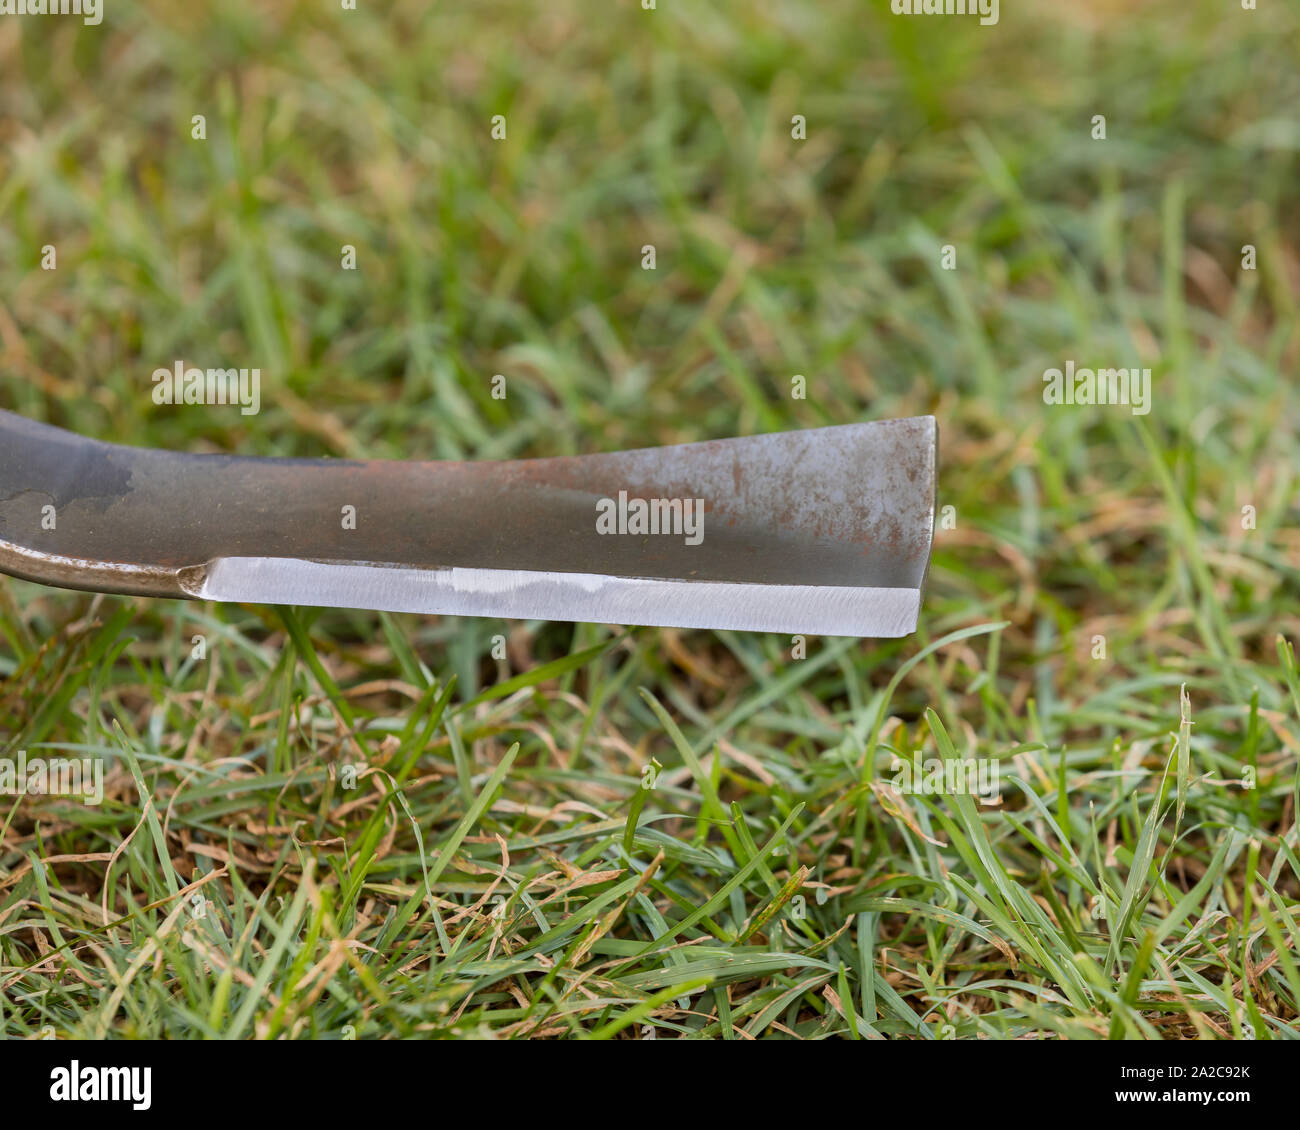 Closeup of lawn mower blade with sharp cutting edge. Concept of home and lawn maintenance and repair. green grass of yard in background Stock Photo